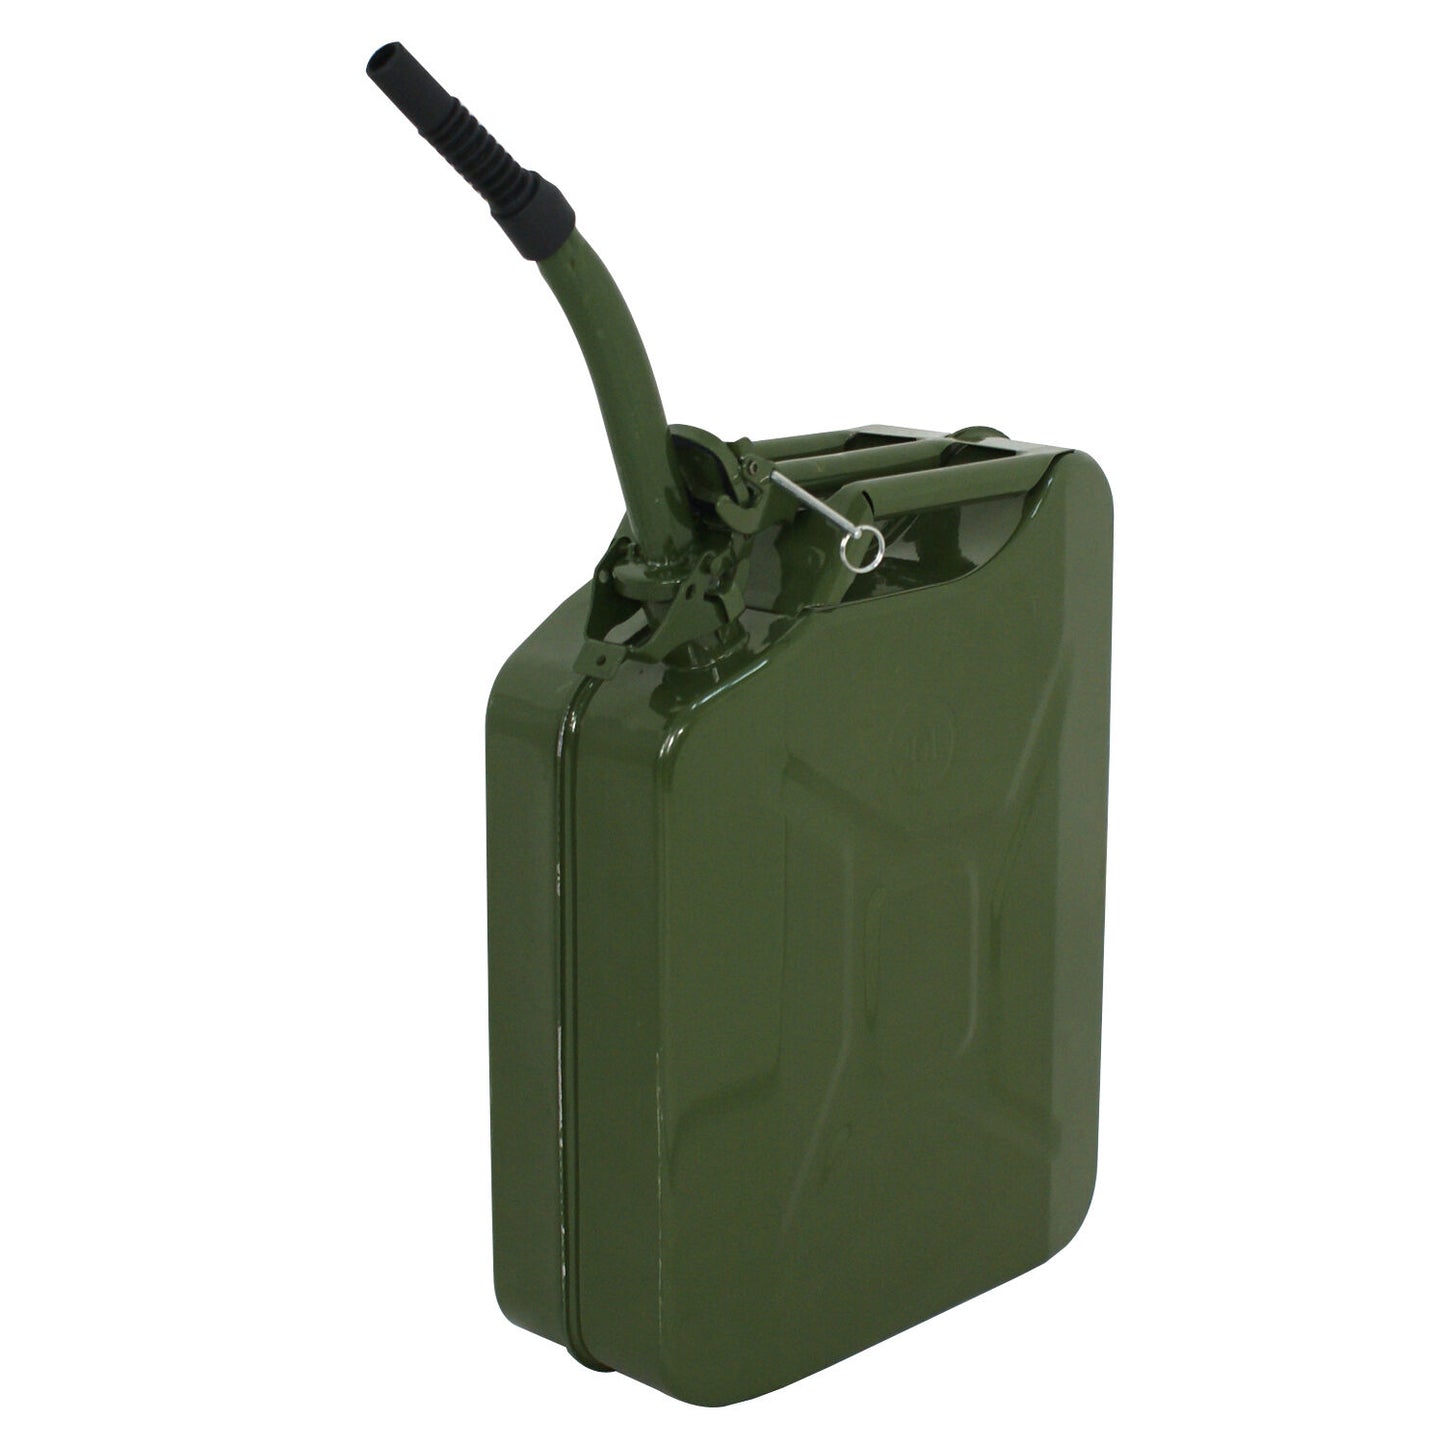 Two Green 5 Gallon 20L Jerry Can Metal Steel Tank Military Style Storage Can